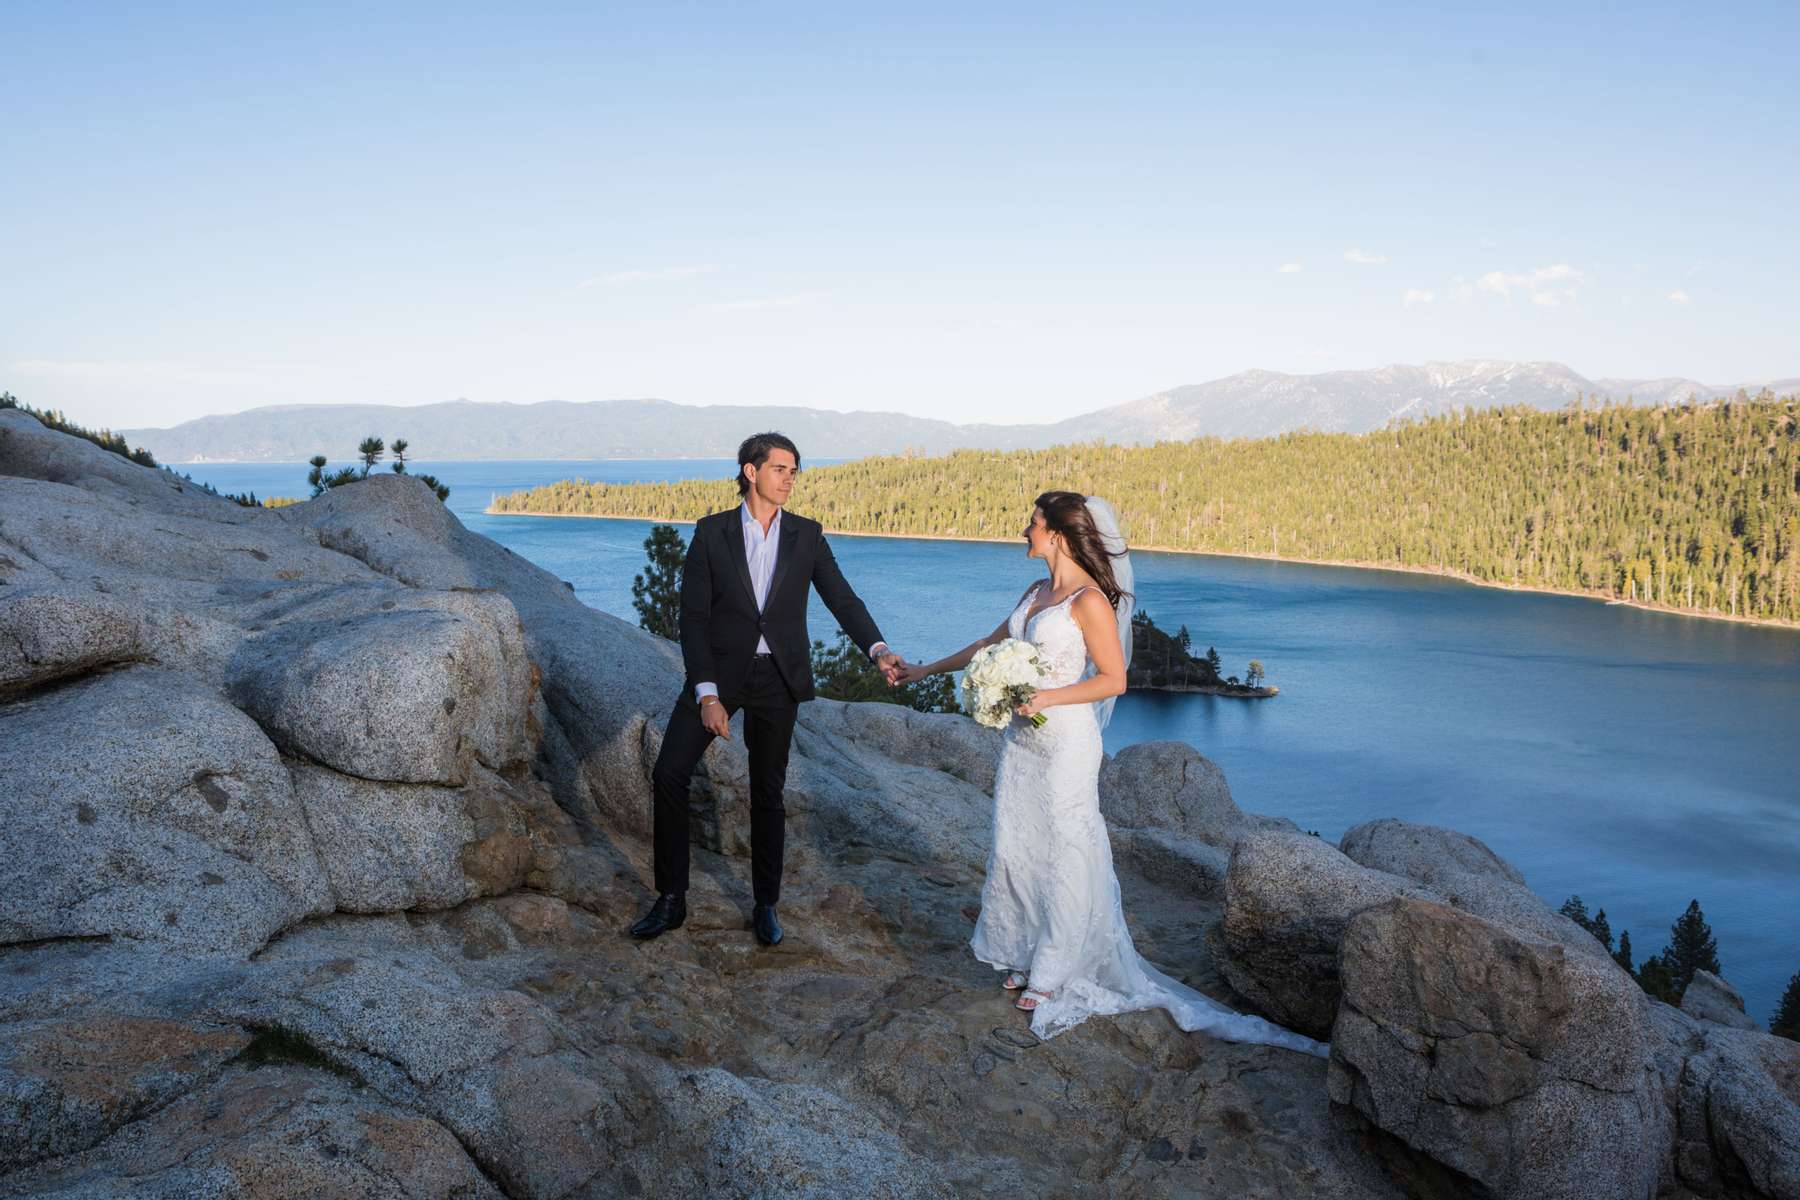 Having your wedding photos taken at Lake Tahoe can result in some truly stunning images. The lake provides a backdrop of stunning natural beauty, with mountains, forests, and crystal-clear waters. You and your spouse can take advantage of the lake's many scenic spots, including sandy beaches, forested hiking trails, and rocky outcroppings with panoramic views. 